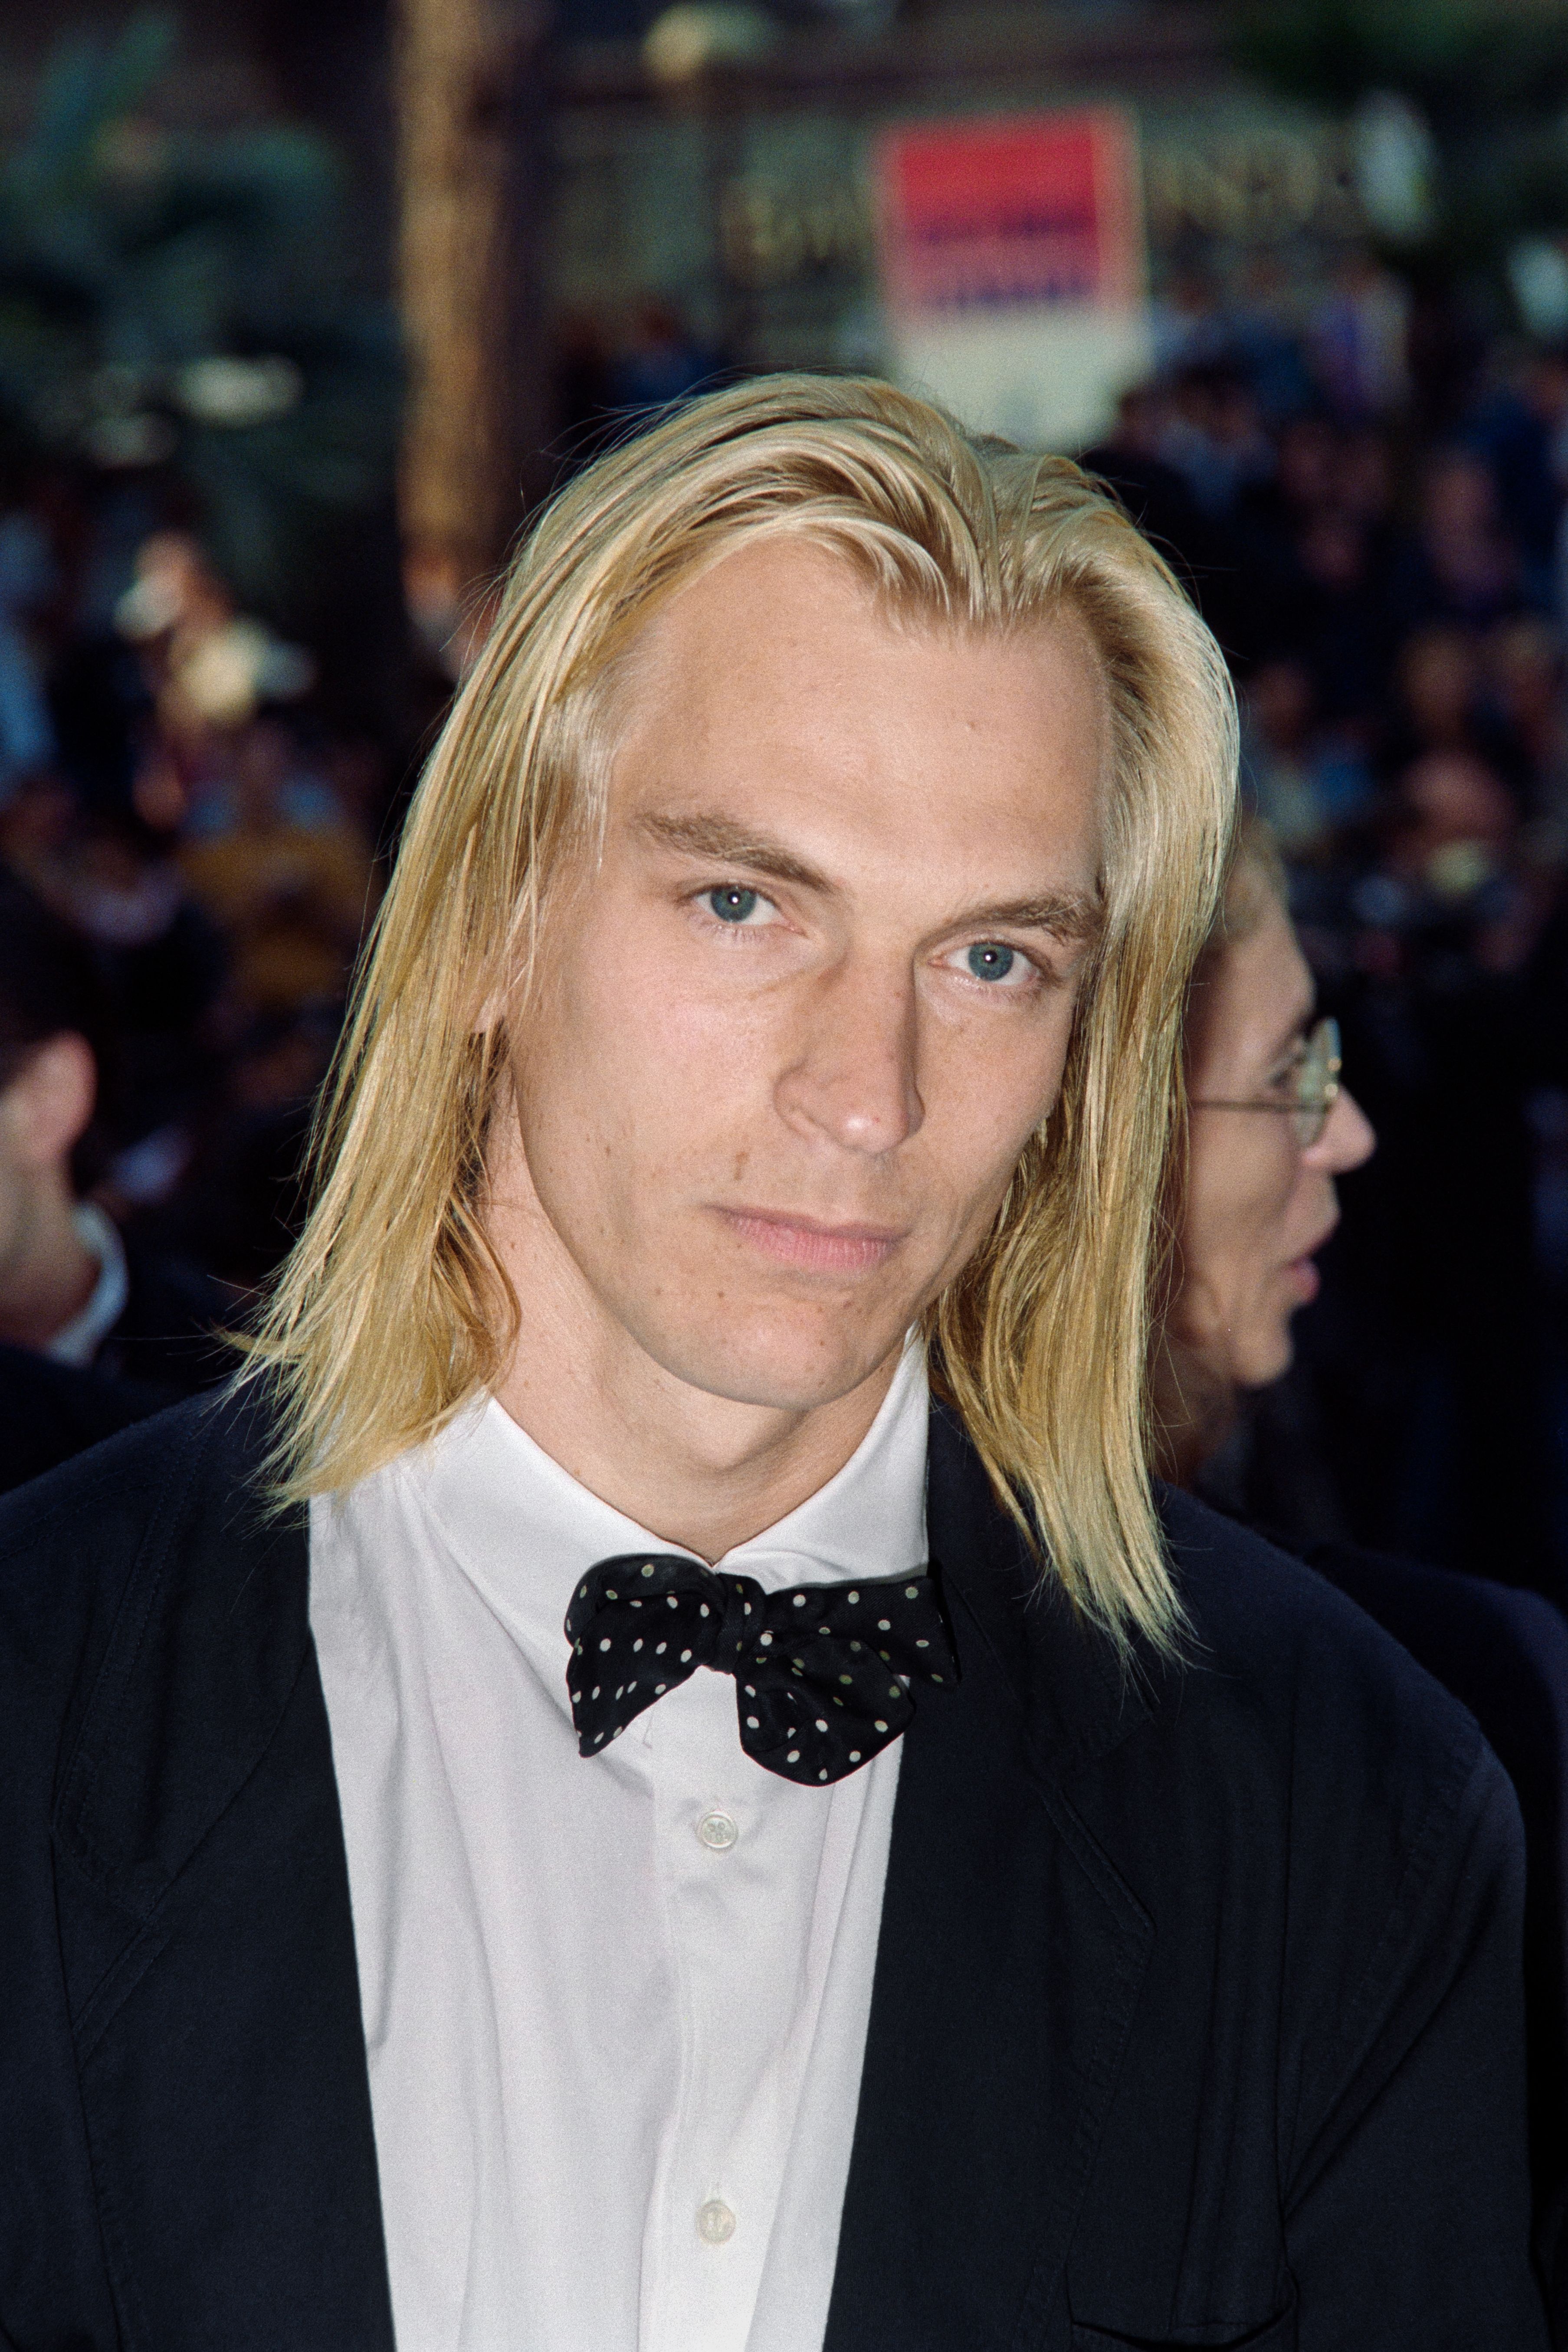 Julian Sands at the Tapis Rouge at the 43th edition of the Cannes Film Festival in Cannes, southern France on May 14, 1990 | Source: Getty Images